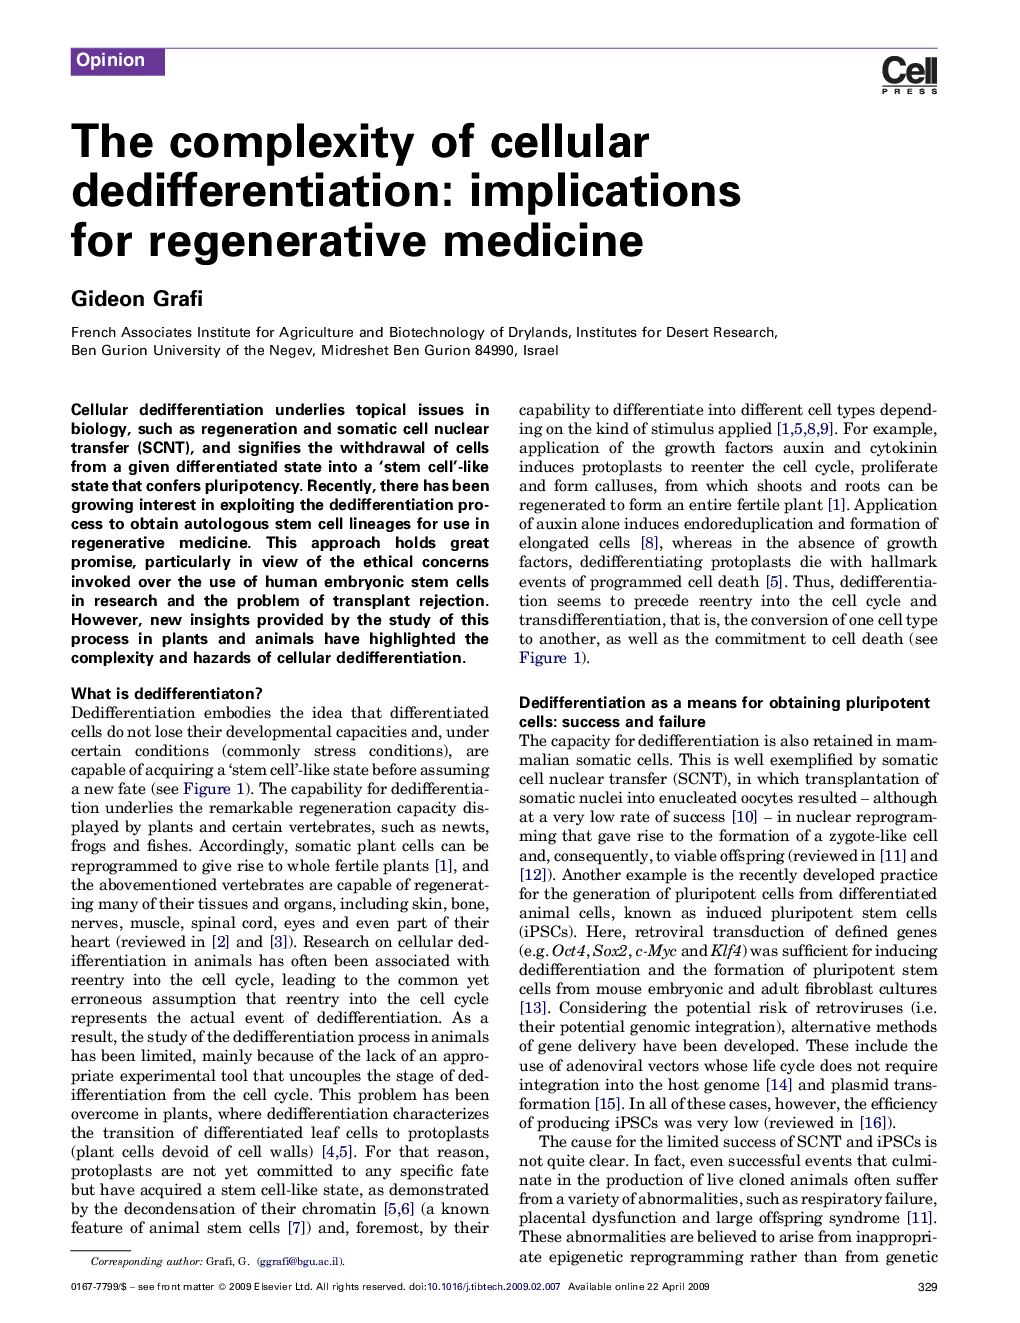 The complexity of cellular dedifferentiation: implications for regenerative medicine